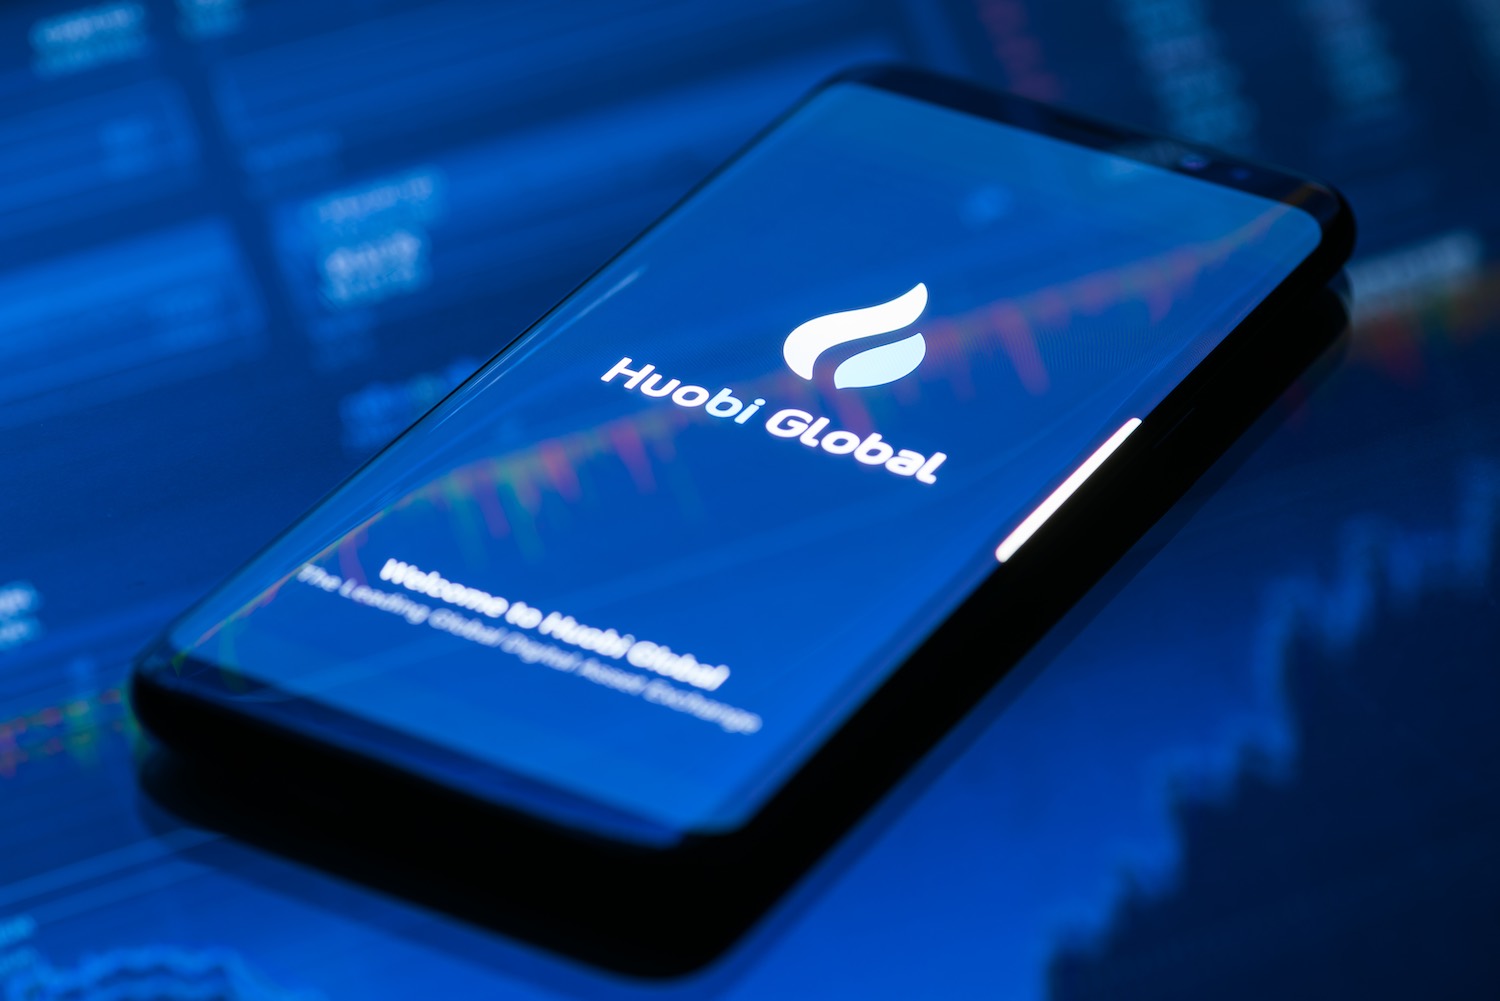 Huobi Launches Low-Cost Blockchain Phone With Built-in Crypto Wallet